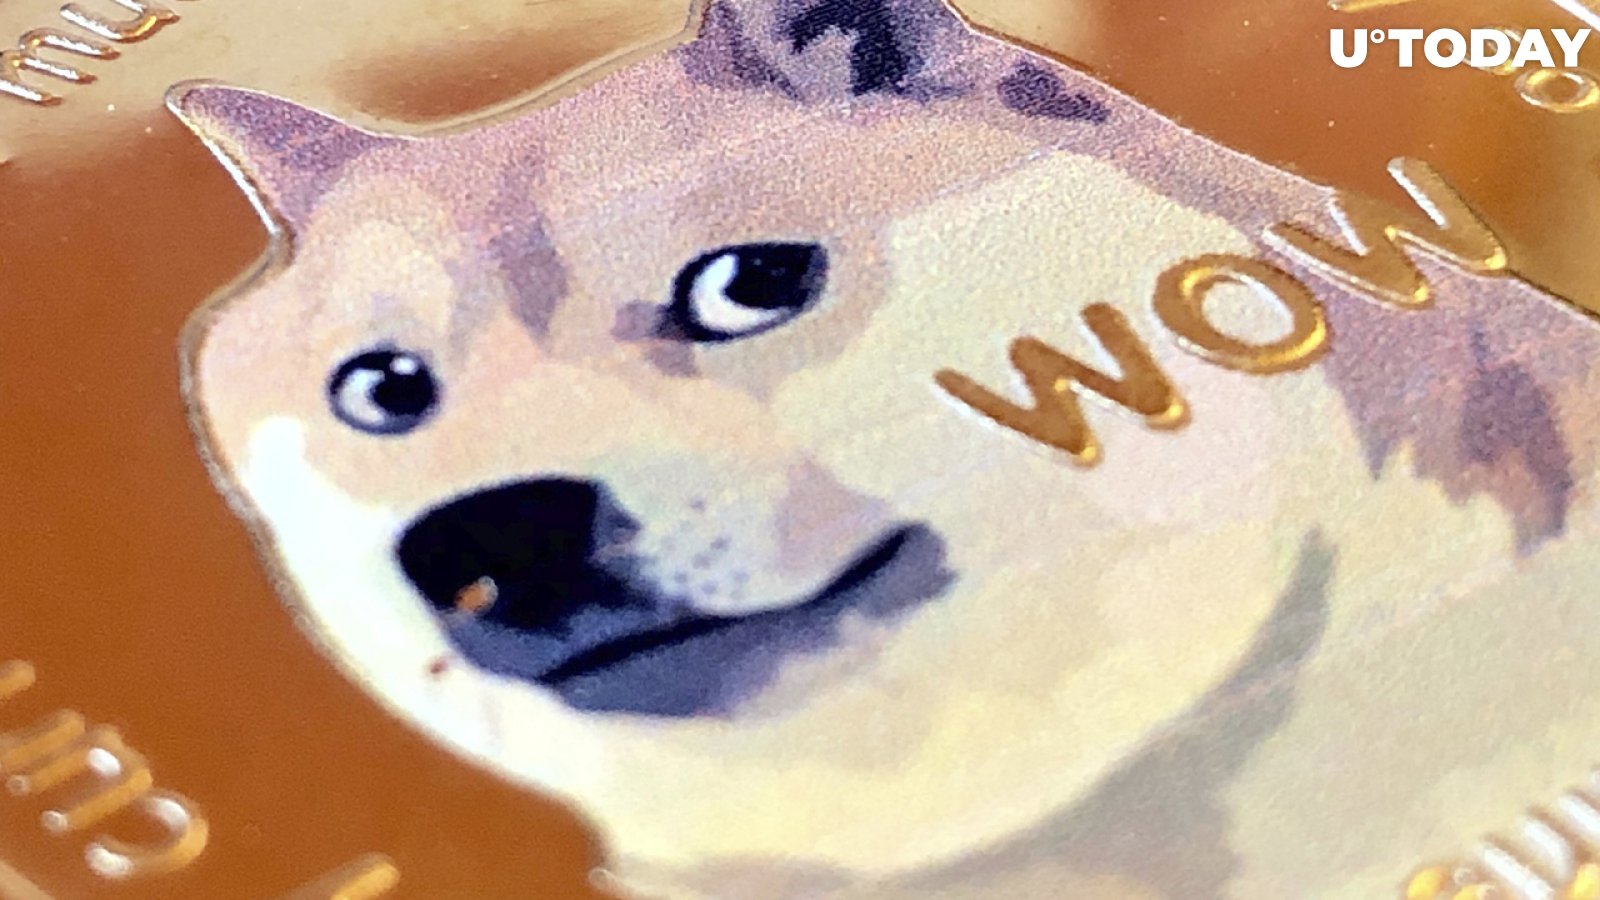 $40 Million Worth of Dogecoin Held by Top BSC Whales - DOGE Loses to MATIC: Details